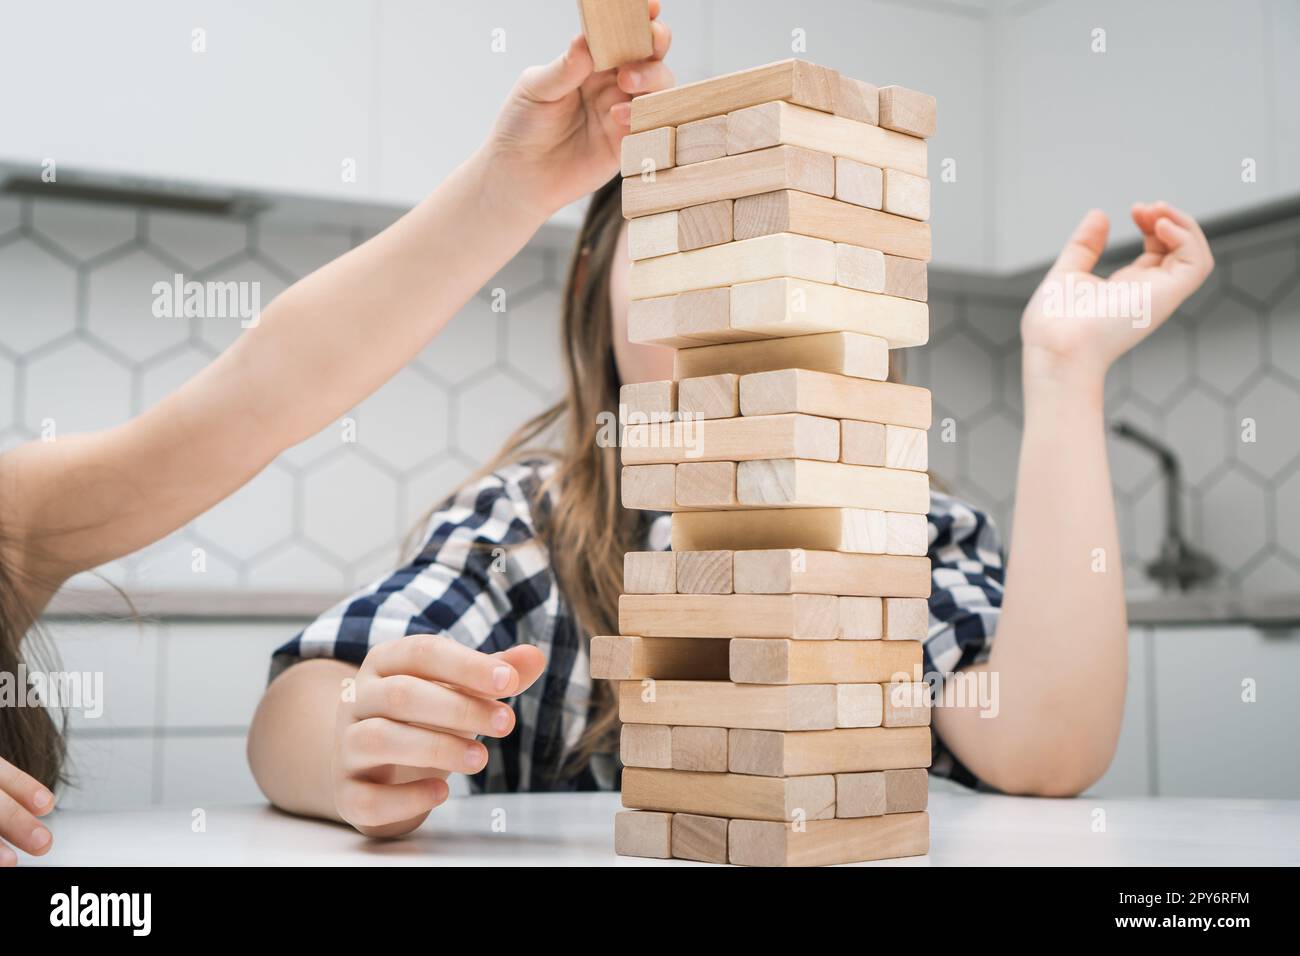 School kids play jenga sitting at kitchen table closeup. Hand of girl put wooden block on top of tower keeping balance. Stock Photo